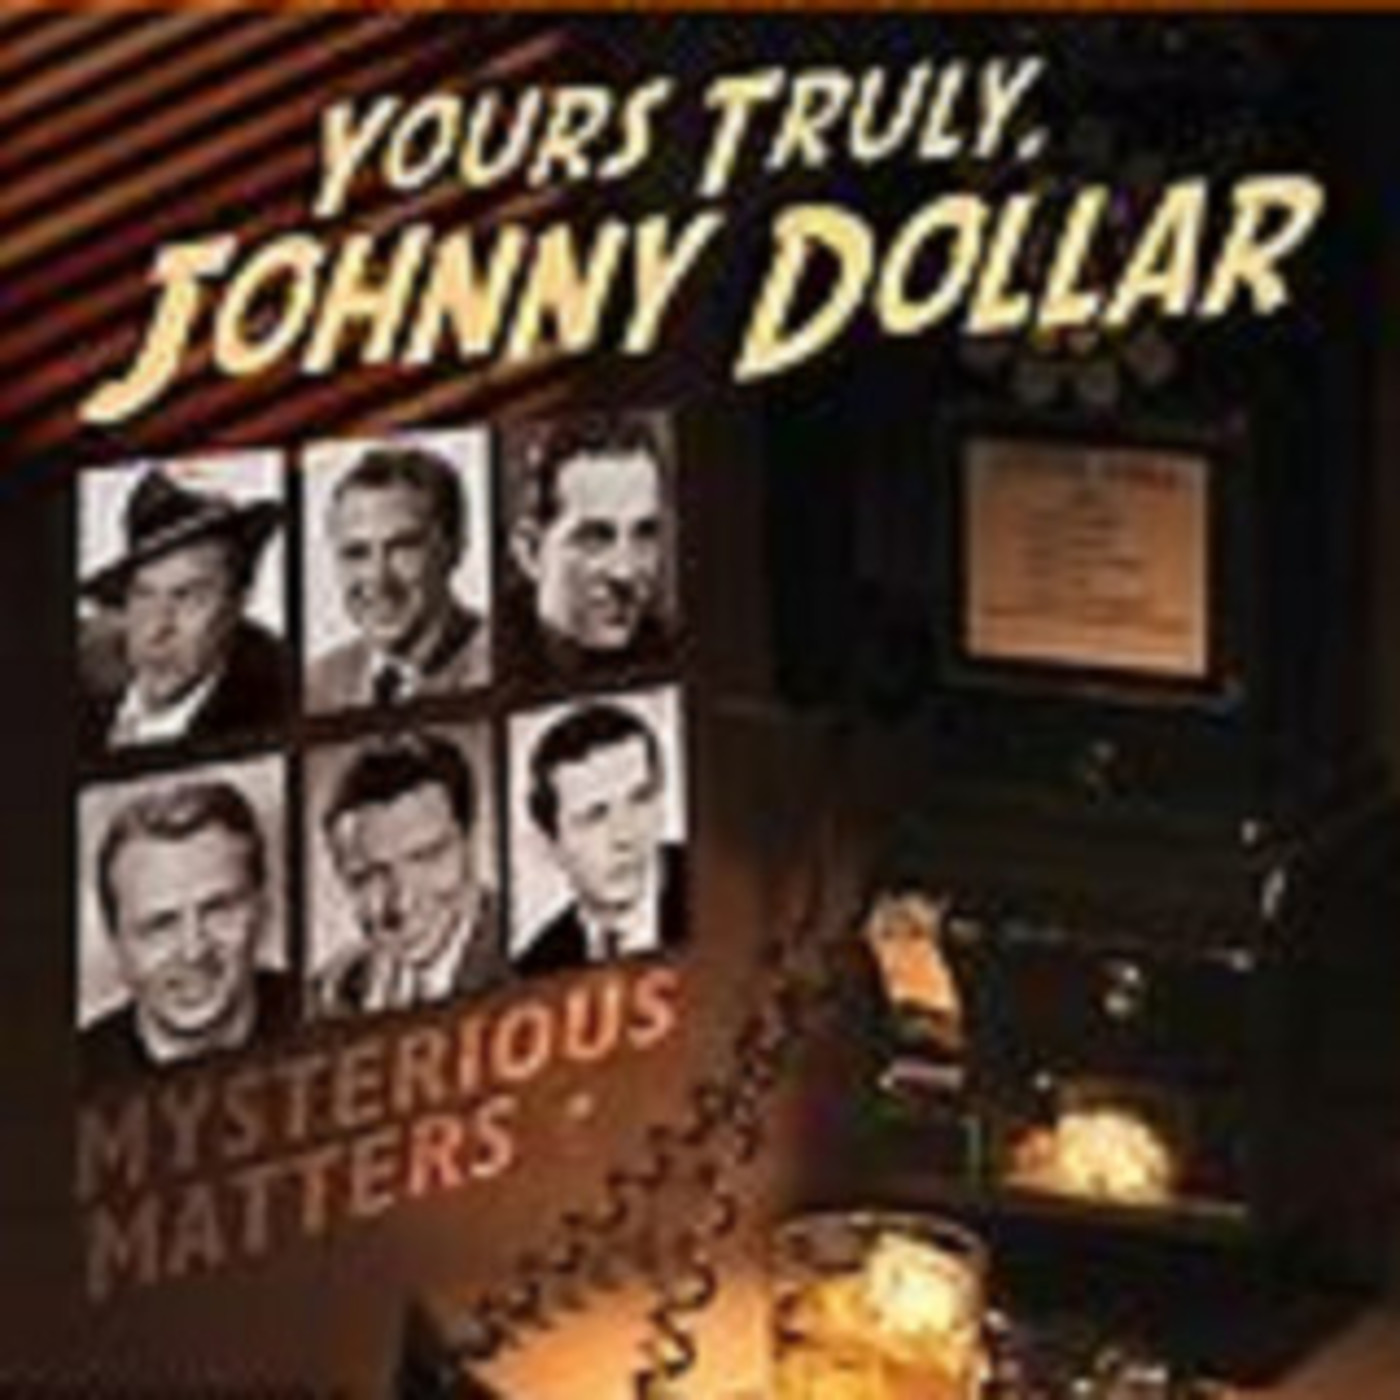 Yours Truly, Johnny Dollar - 081262, episode 804 - The Oldest Gag Matter